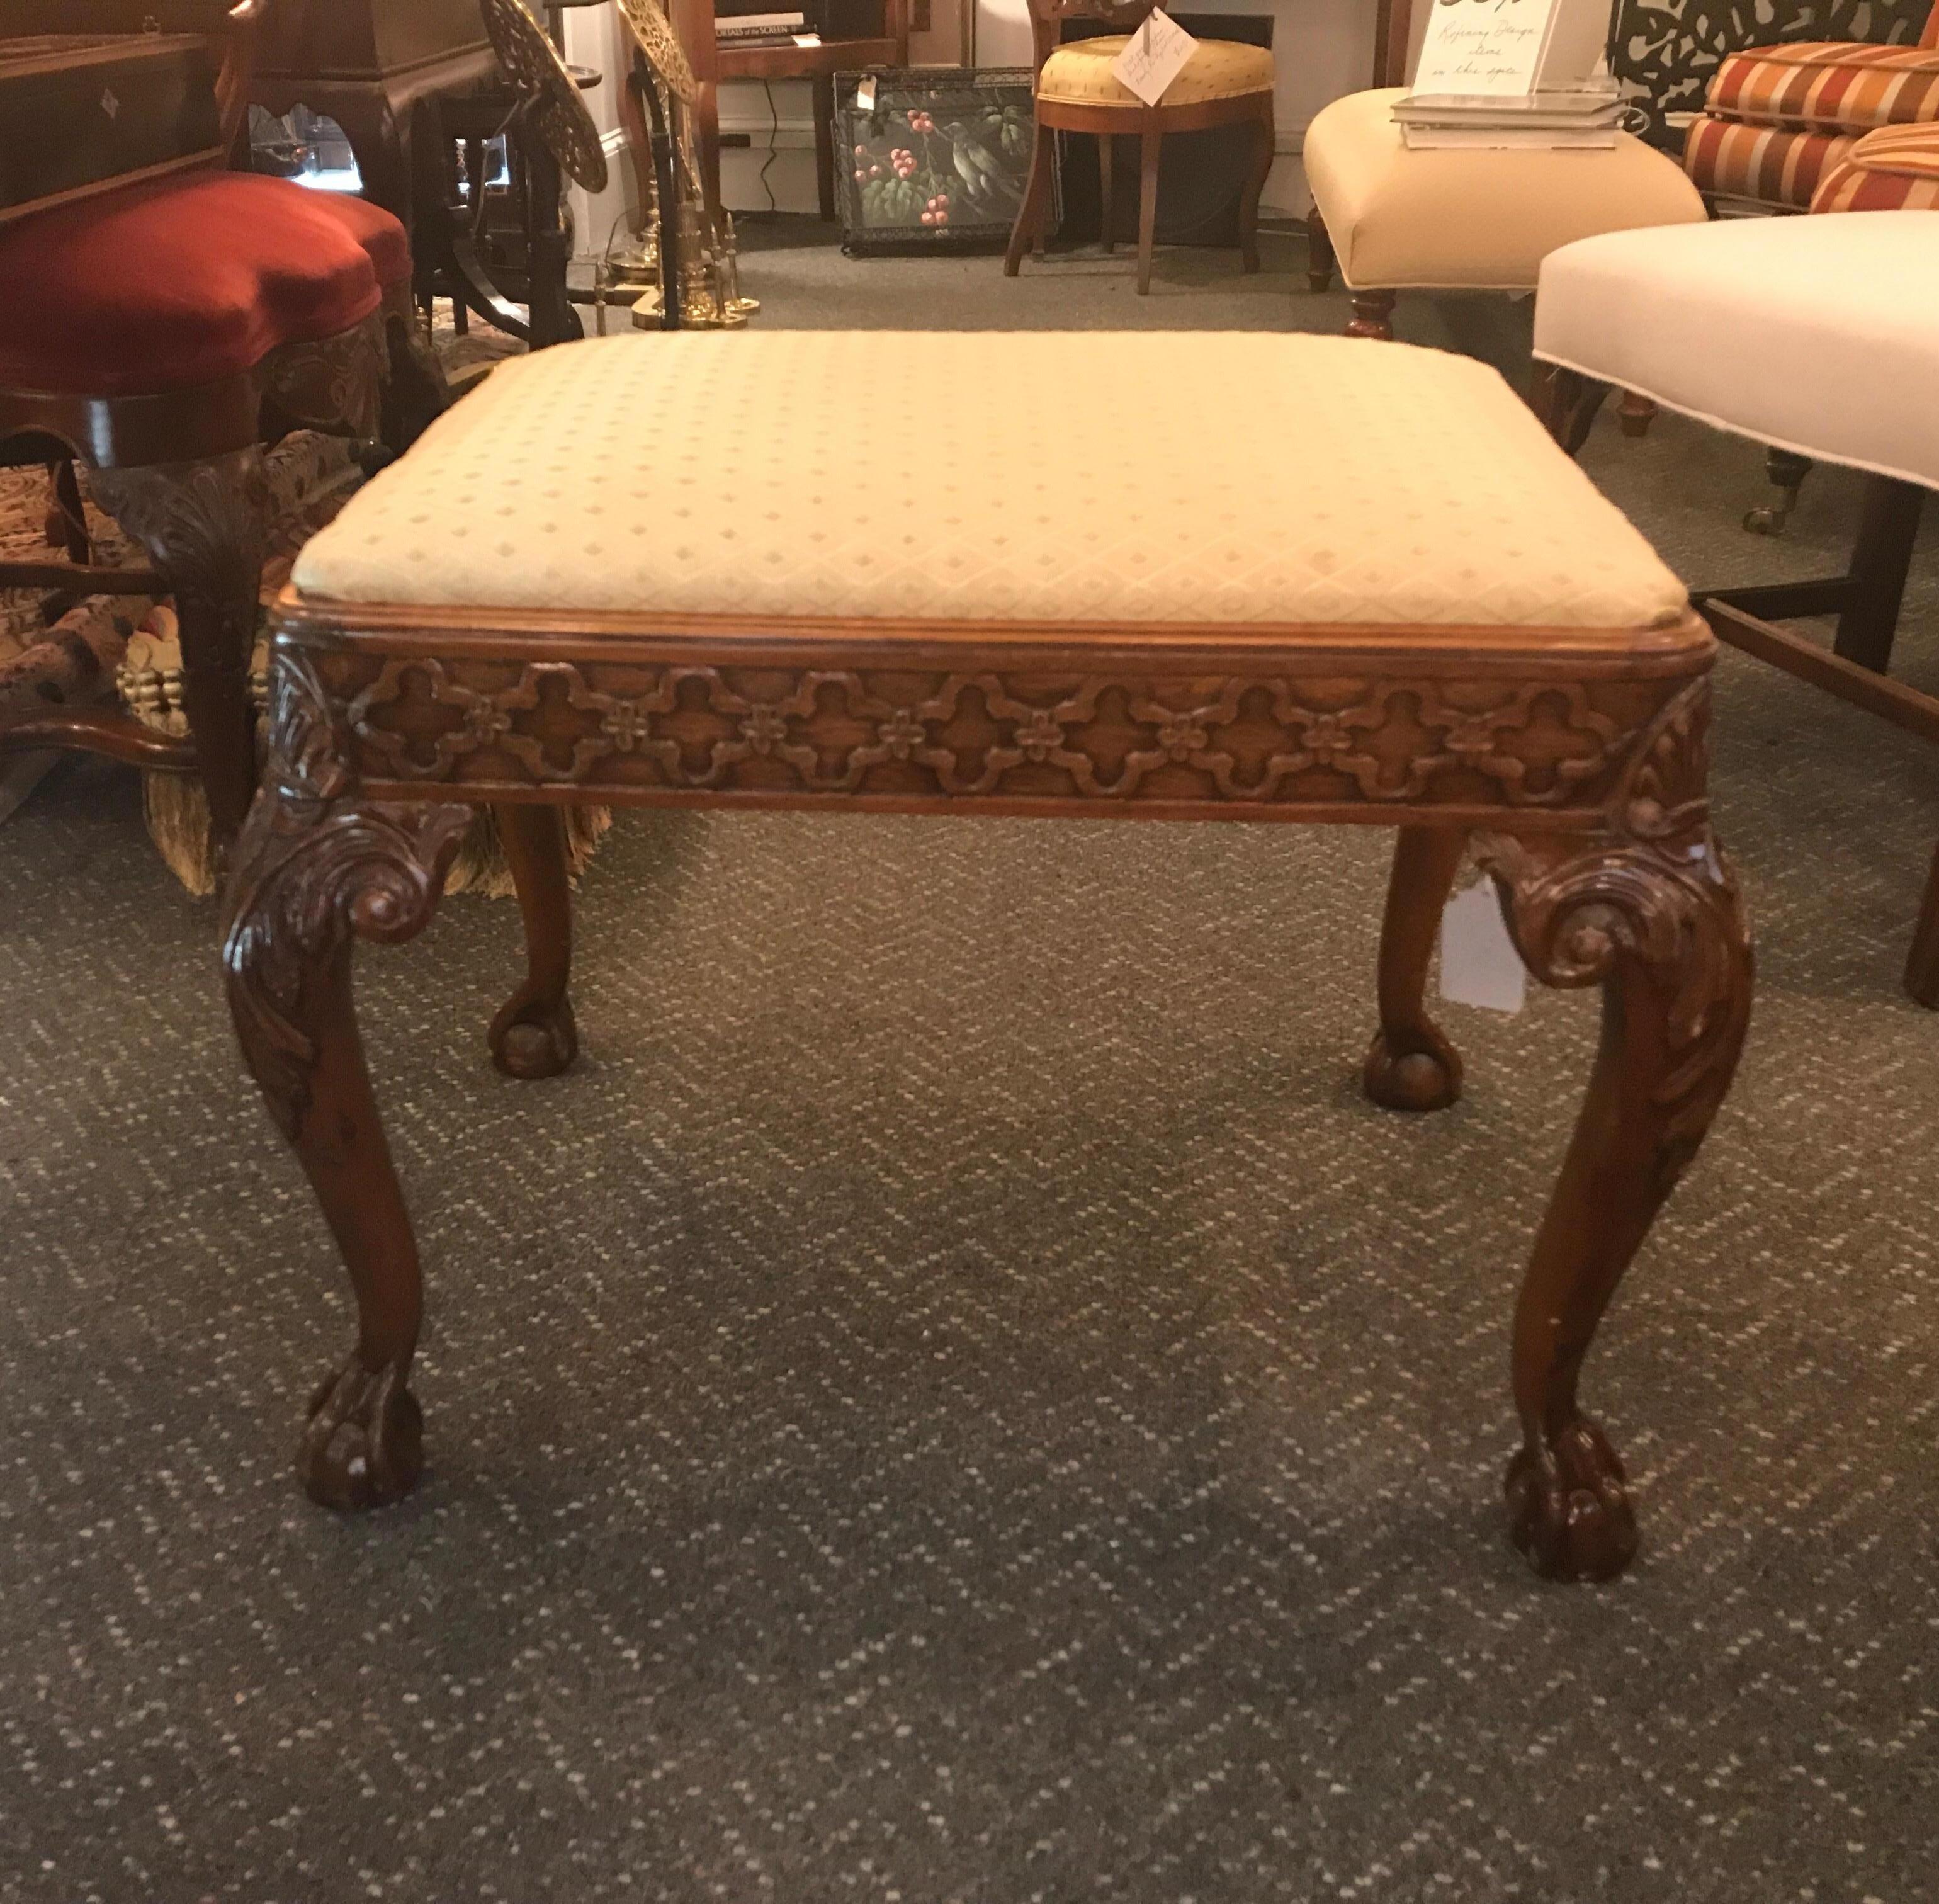 A carved mahogany Chippendale style bench with new fabric seat. The ball and claw carved legs with carved apron all around.